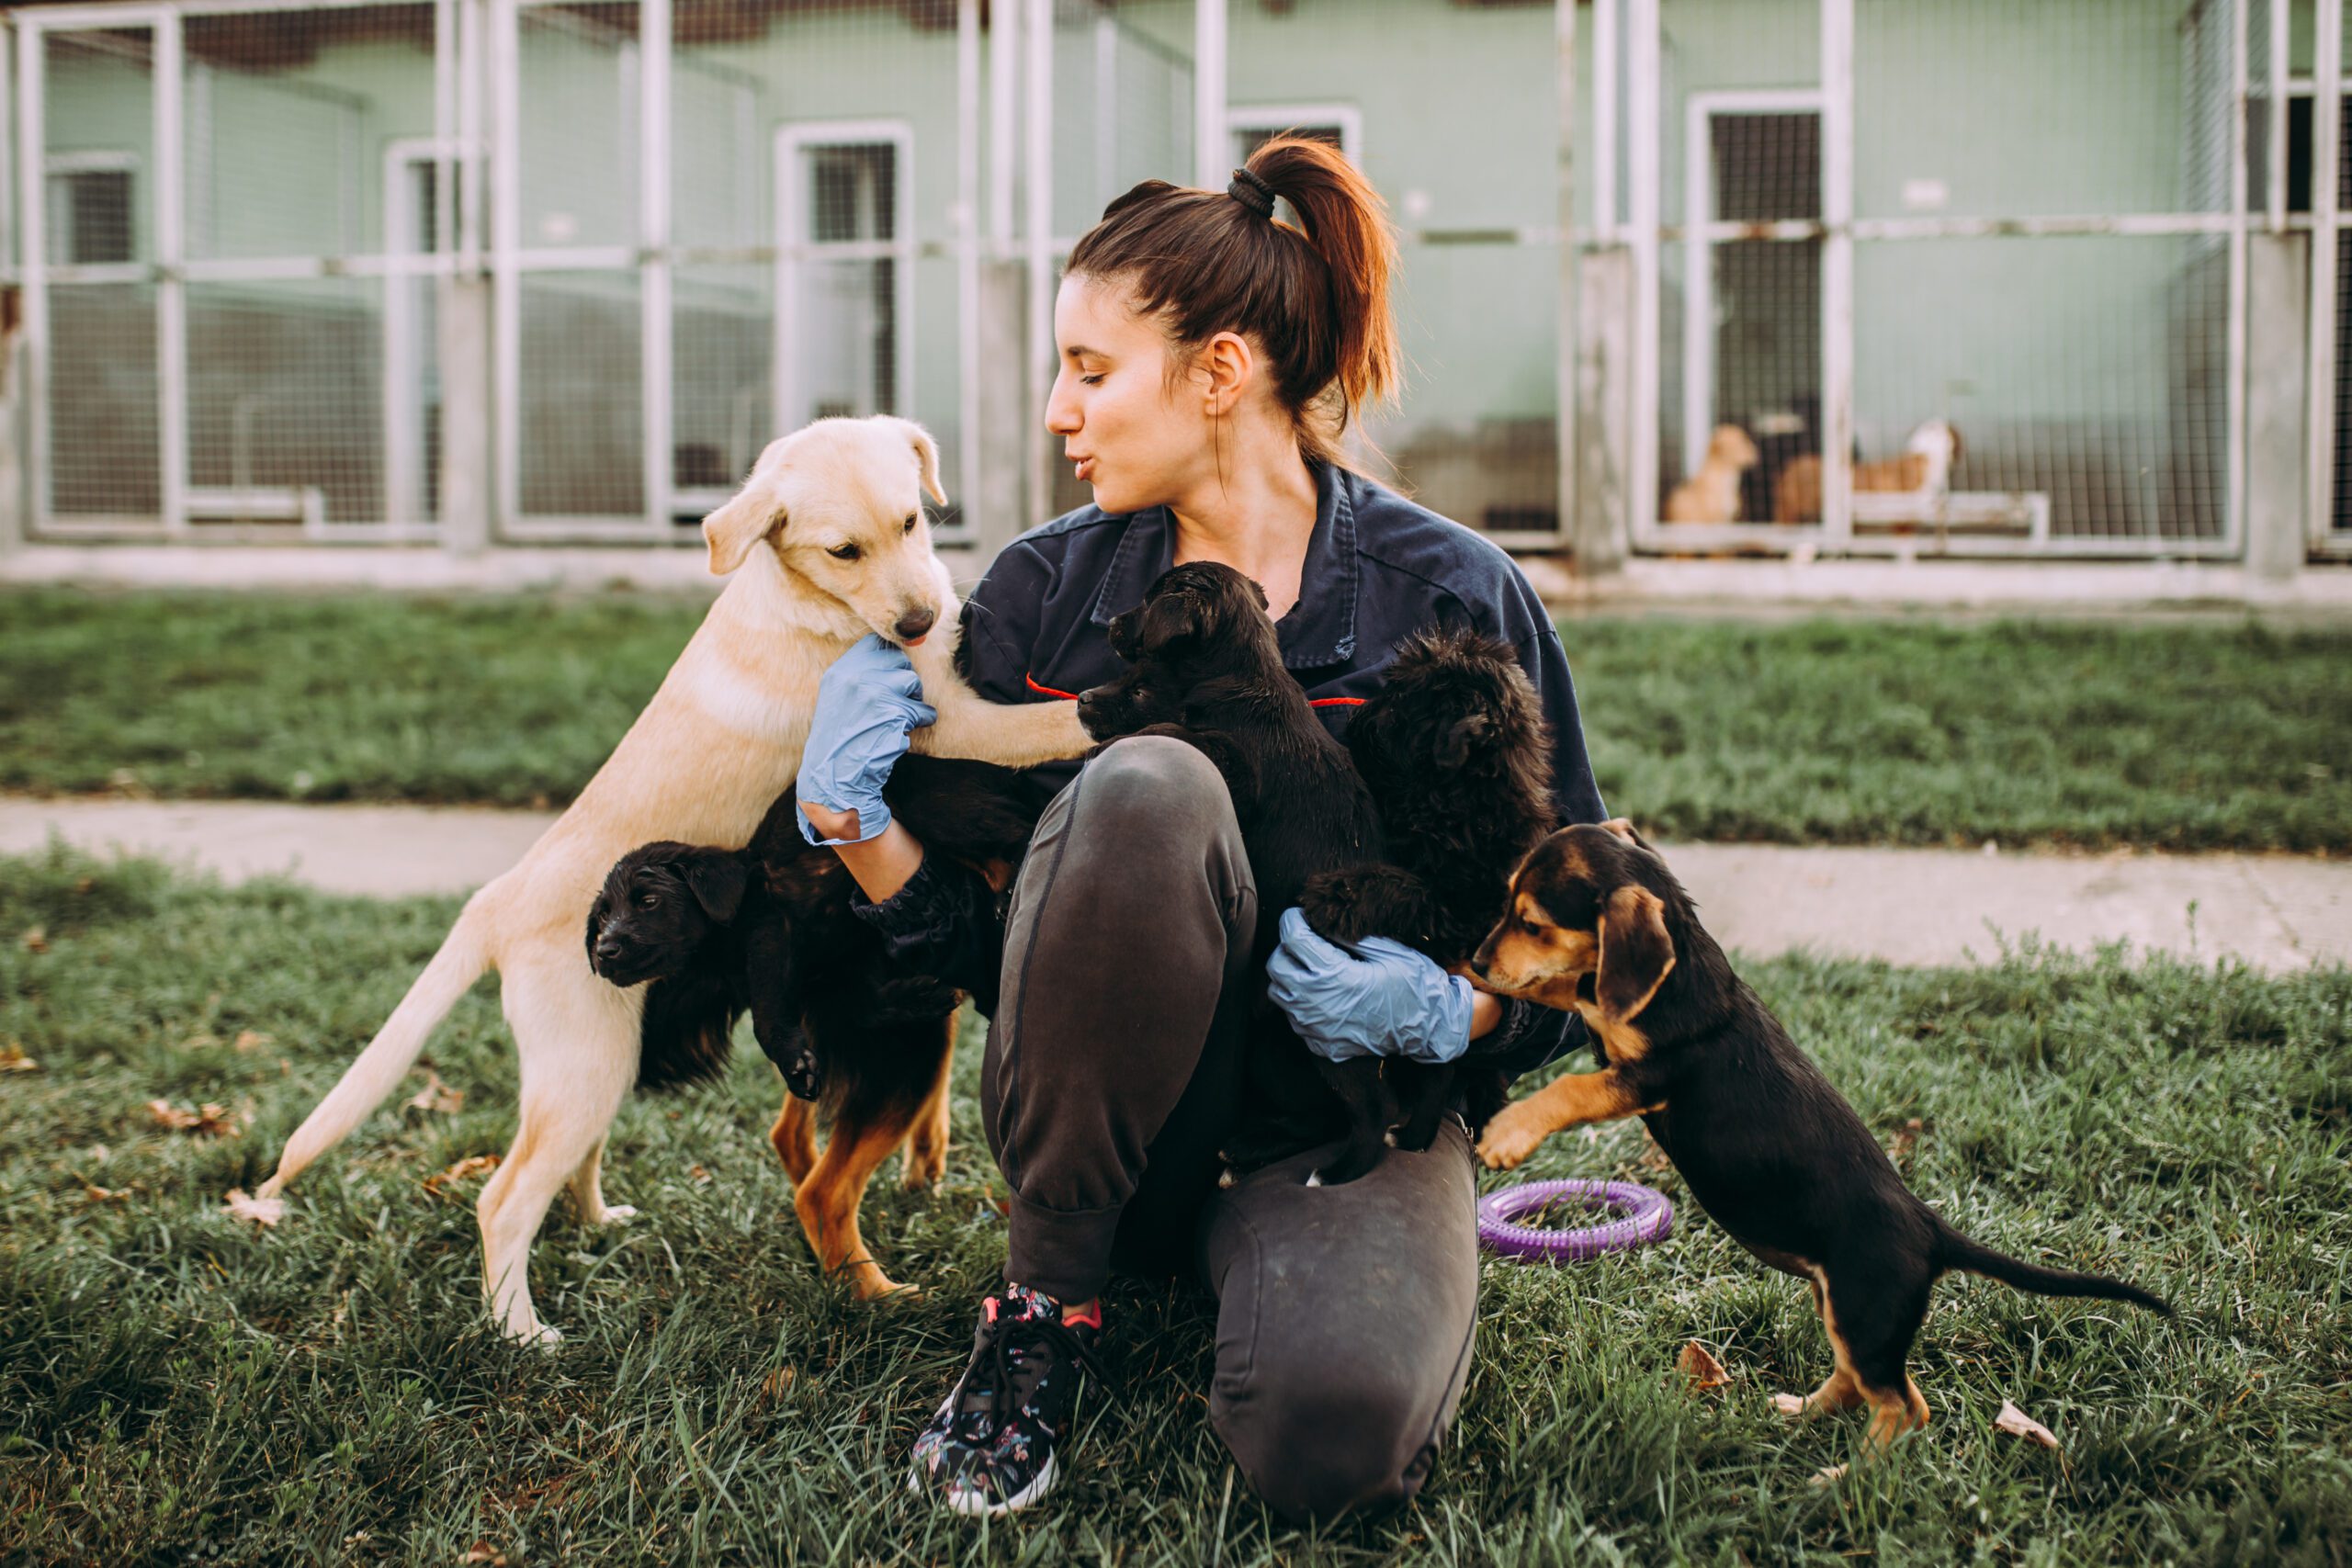 Pet adoption is an exciting life chapter filled with joy and companionship. Read our guide to be well-prepared for pet ownership!